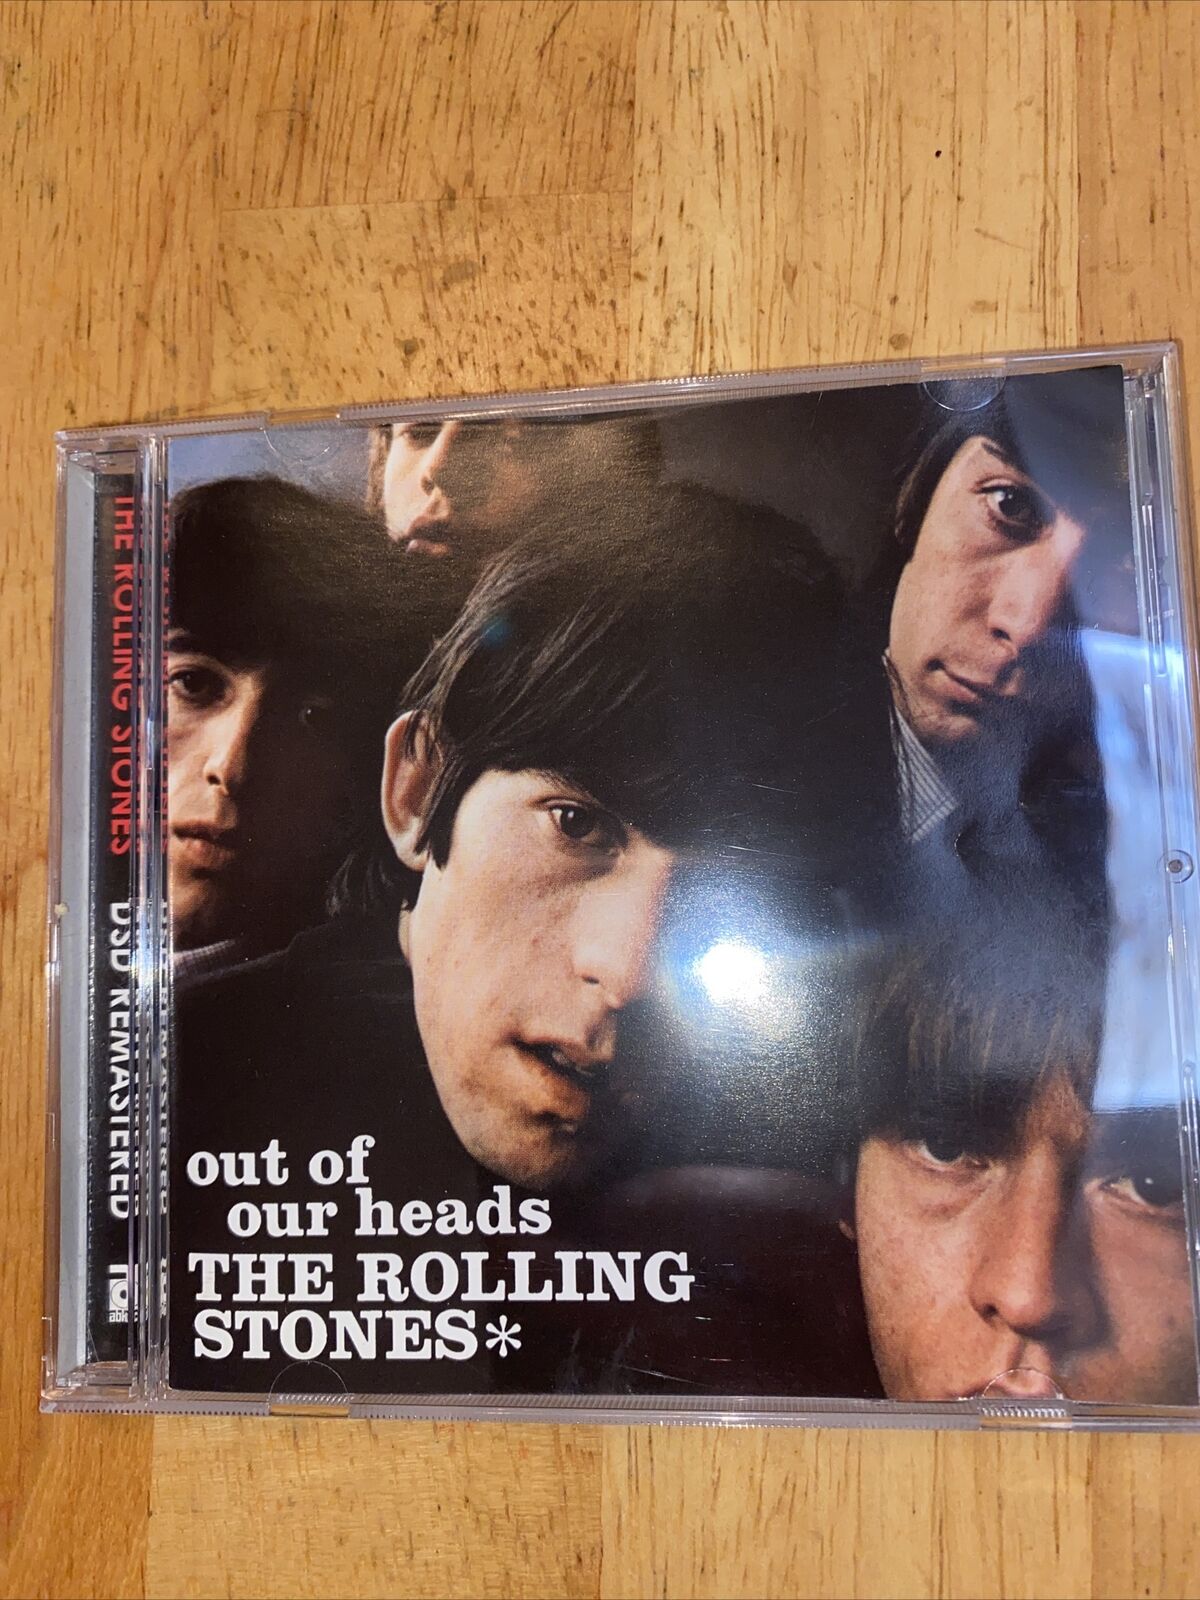 Rolling Stones Out Of Our Heads US CD 2002 ABKCO DSD Remaster Issue